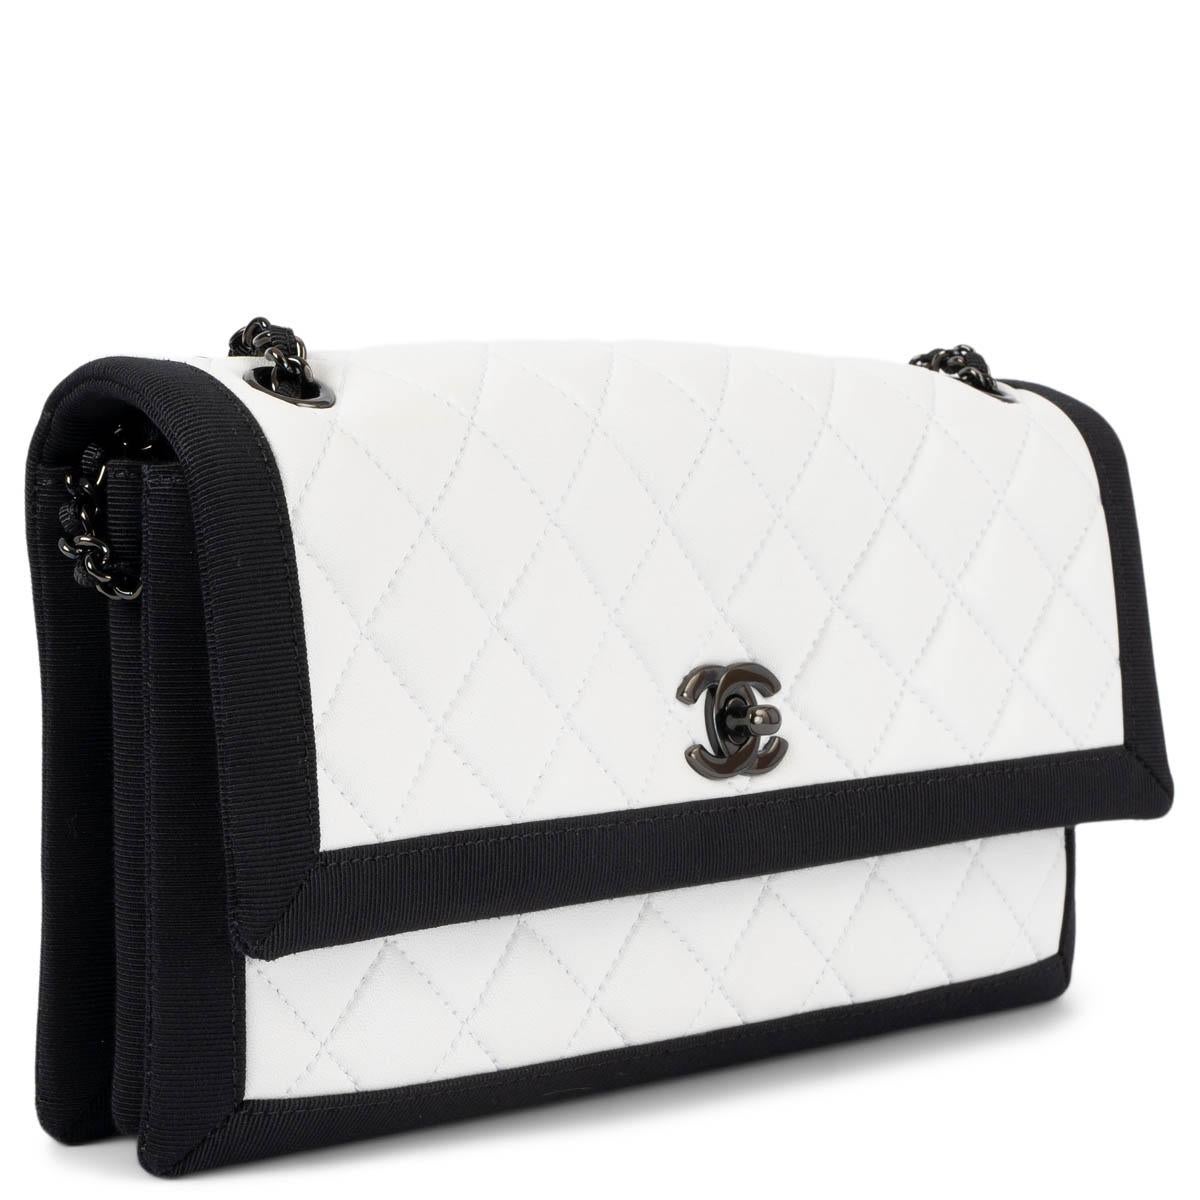 100% authentic Chanel flap bag in smooth white quilted Nappa leather and black grosgrain trim. The design features a slit pocket on the back, shiny gunmetal CC turn-lock and chain. The interior is divided in three compartments and has a zipper